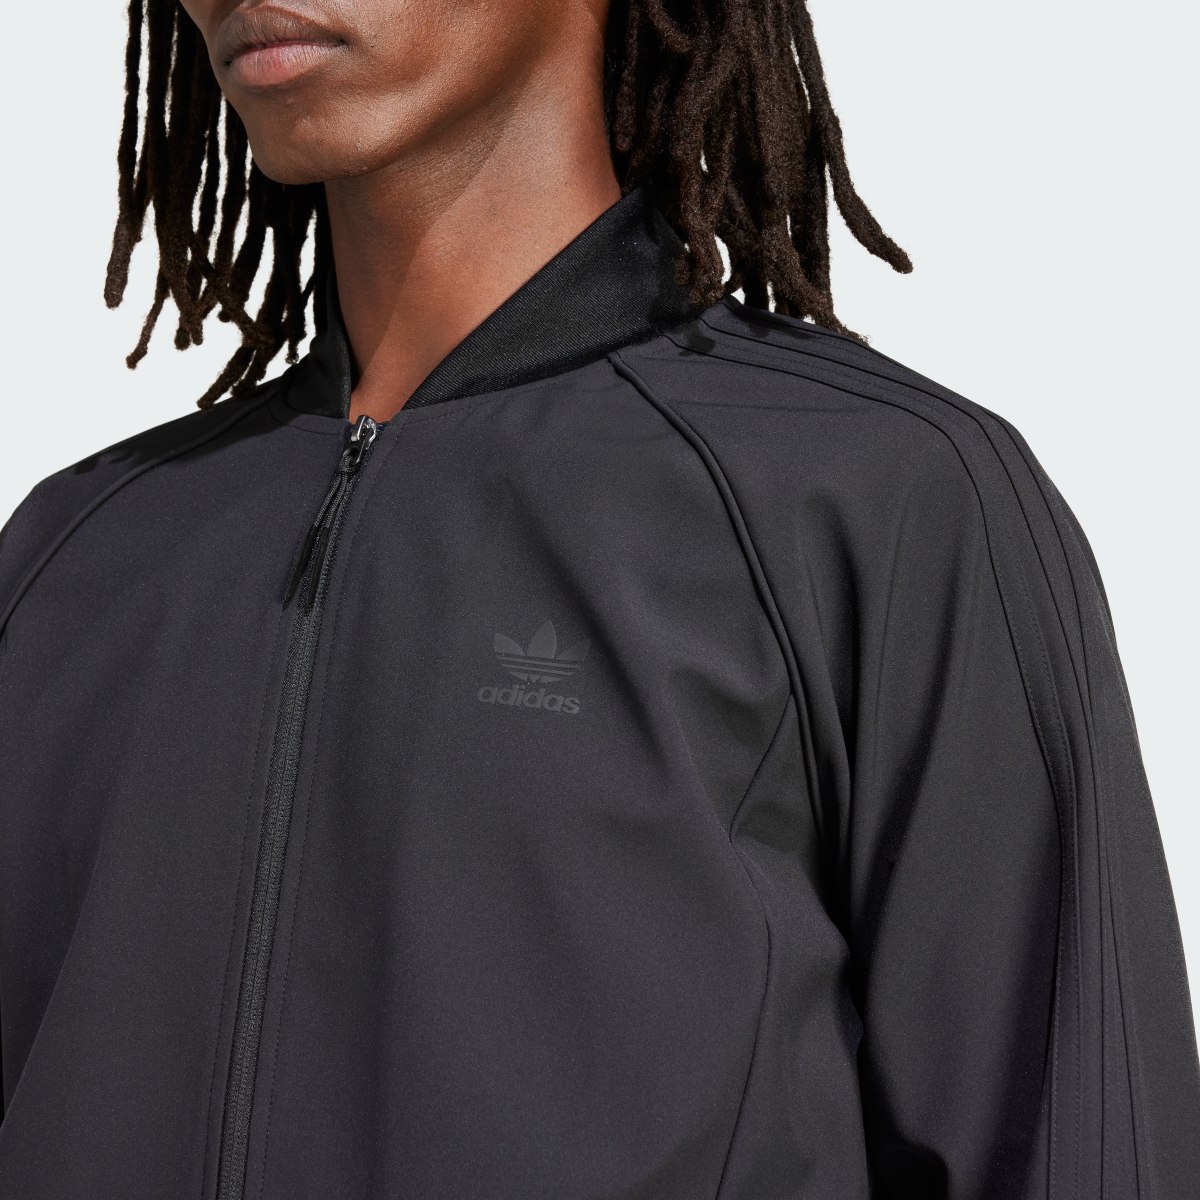 Adidas SST Bonded Track Top. 6